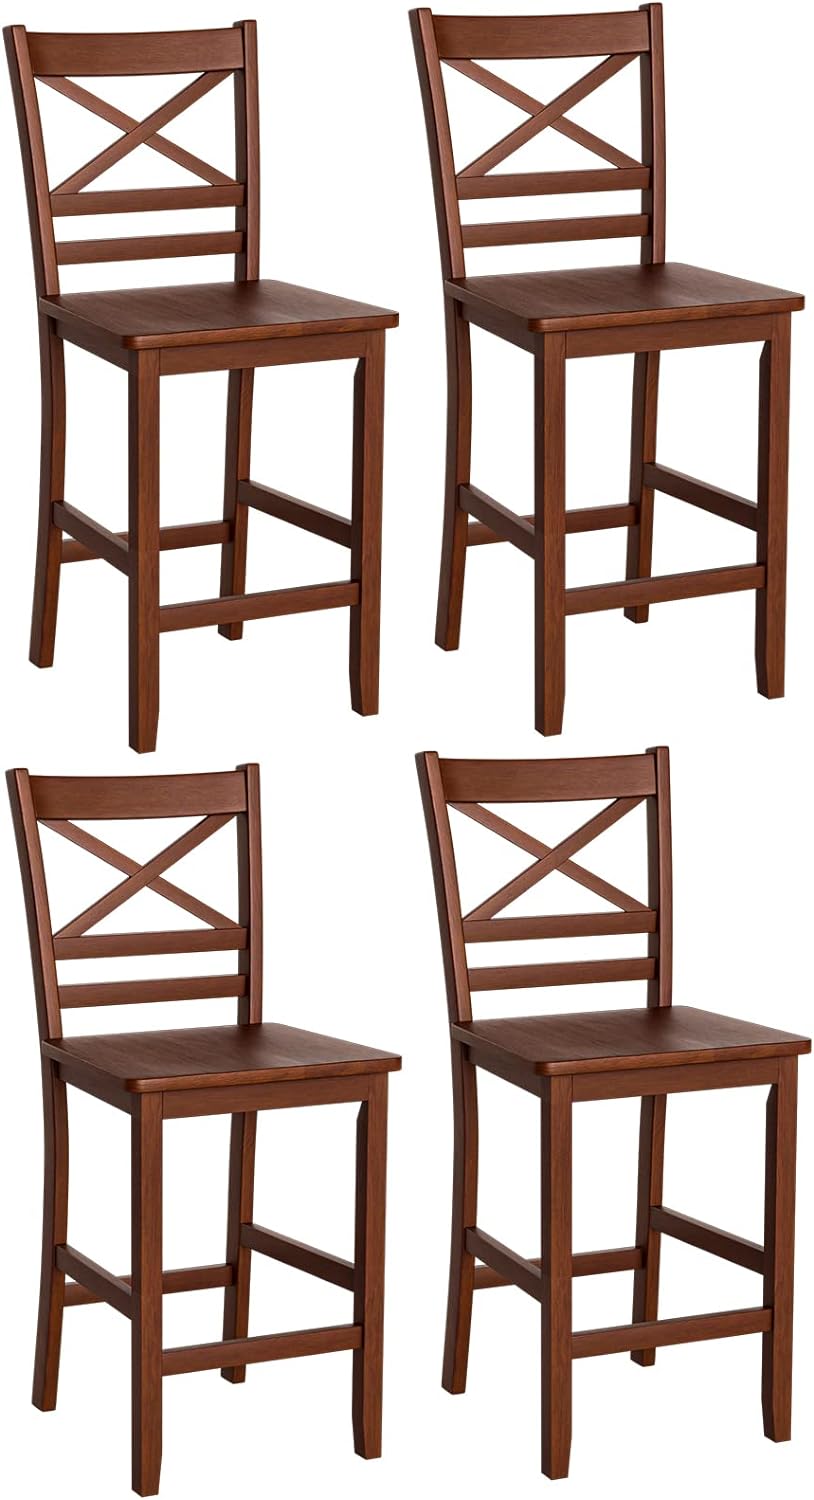 COSTWAY Bar Stools Set of 4, 25'' Antique Kitchen Counter Height Chairs with Wooden X-Shaped Backrest & Rubber Wood Legs, Suitable for Home, Cafe Store, Restaurant (4)